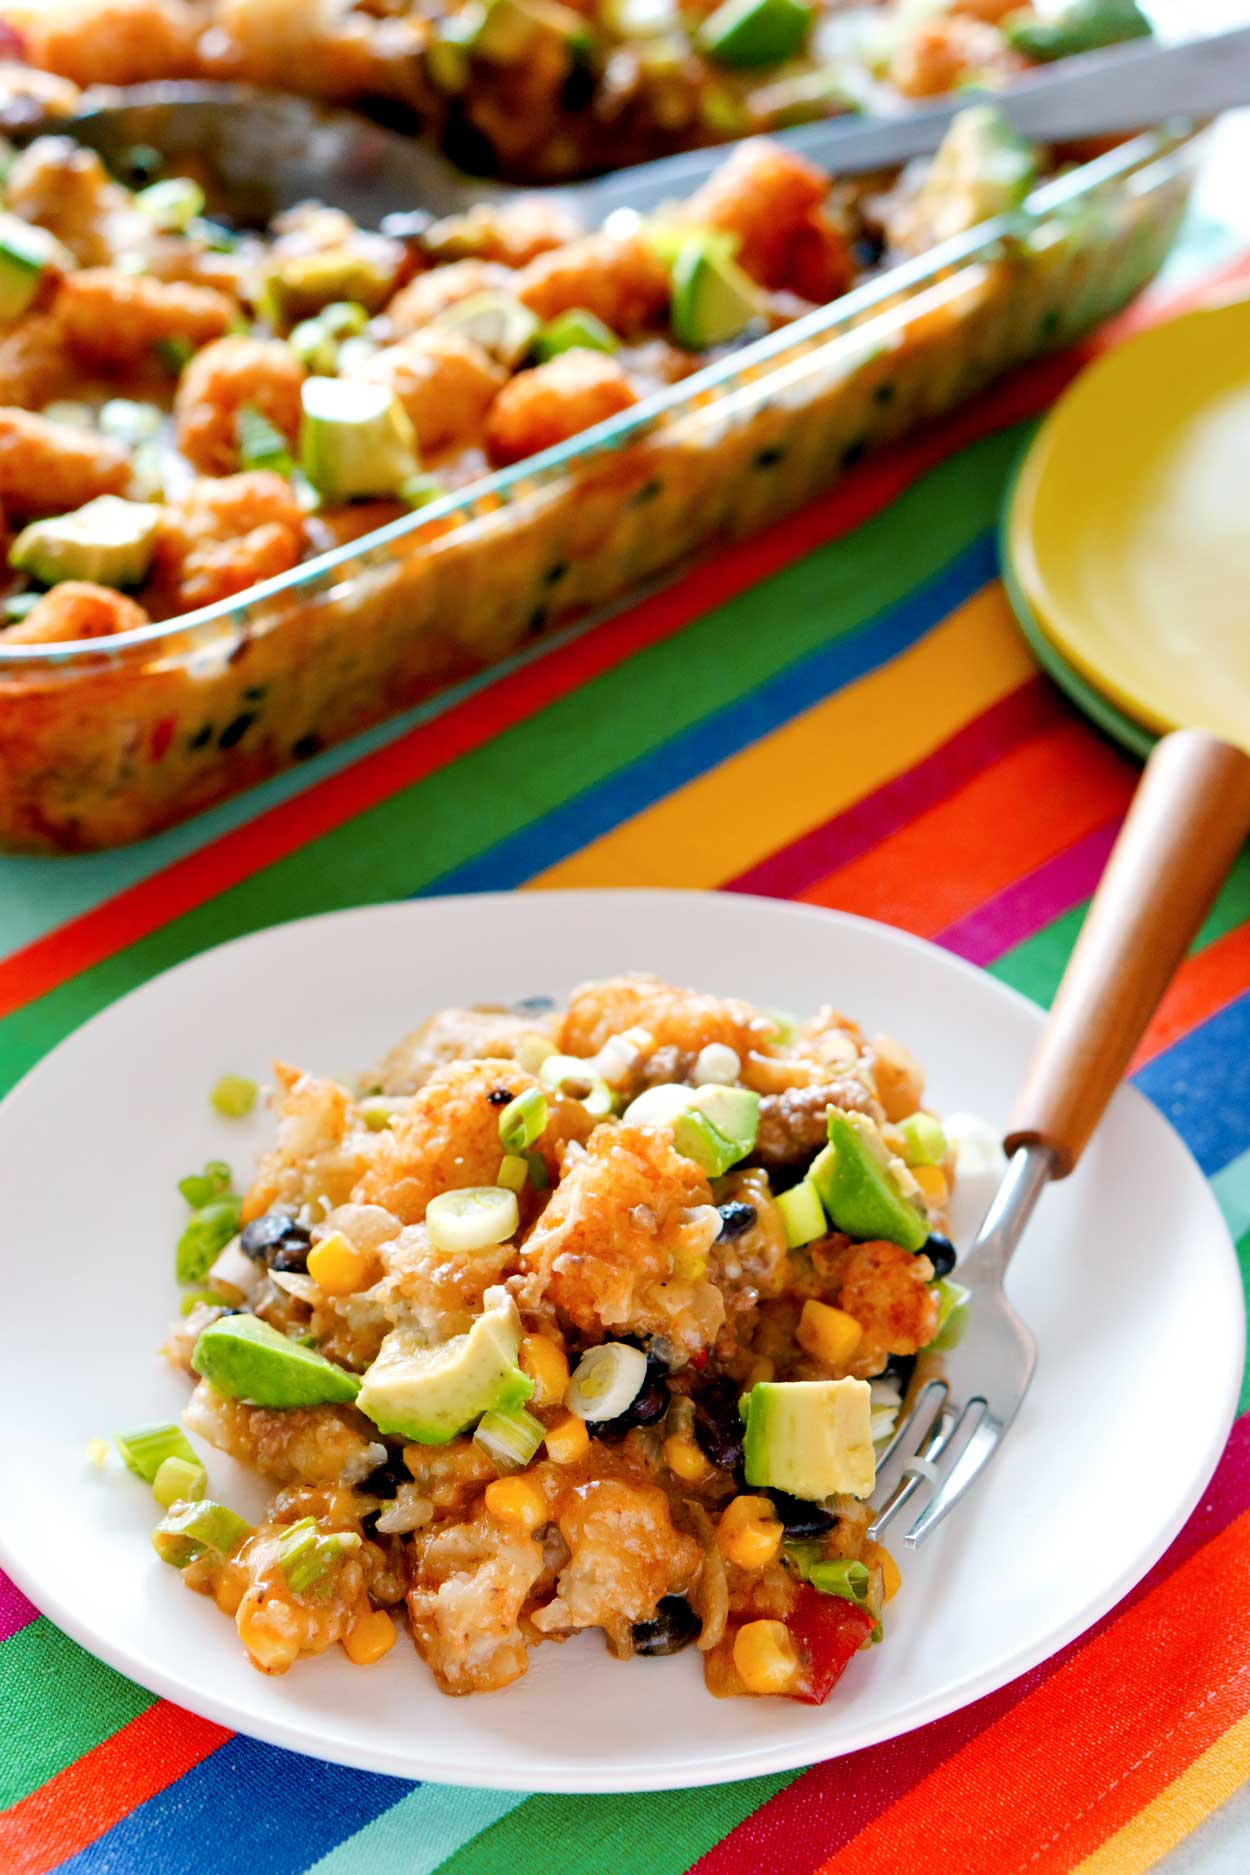 Tater Tot Casserole with corn